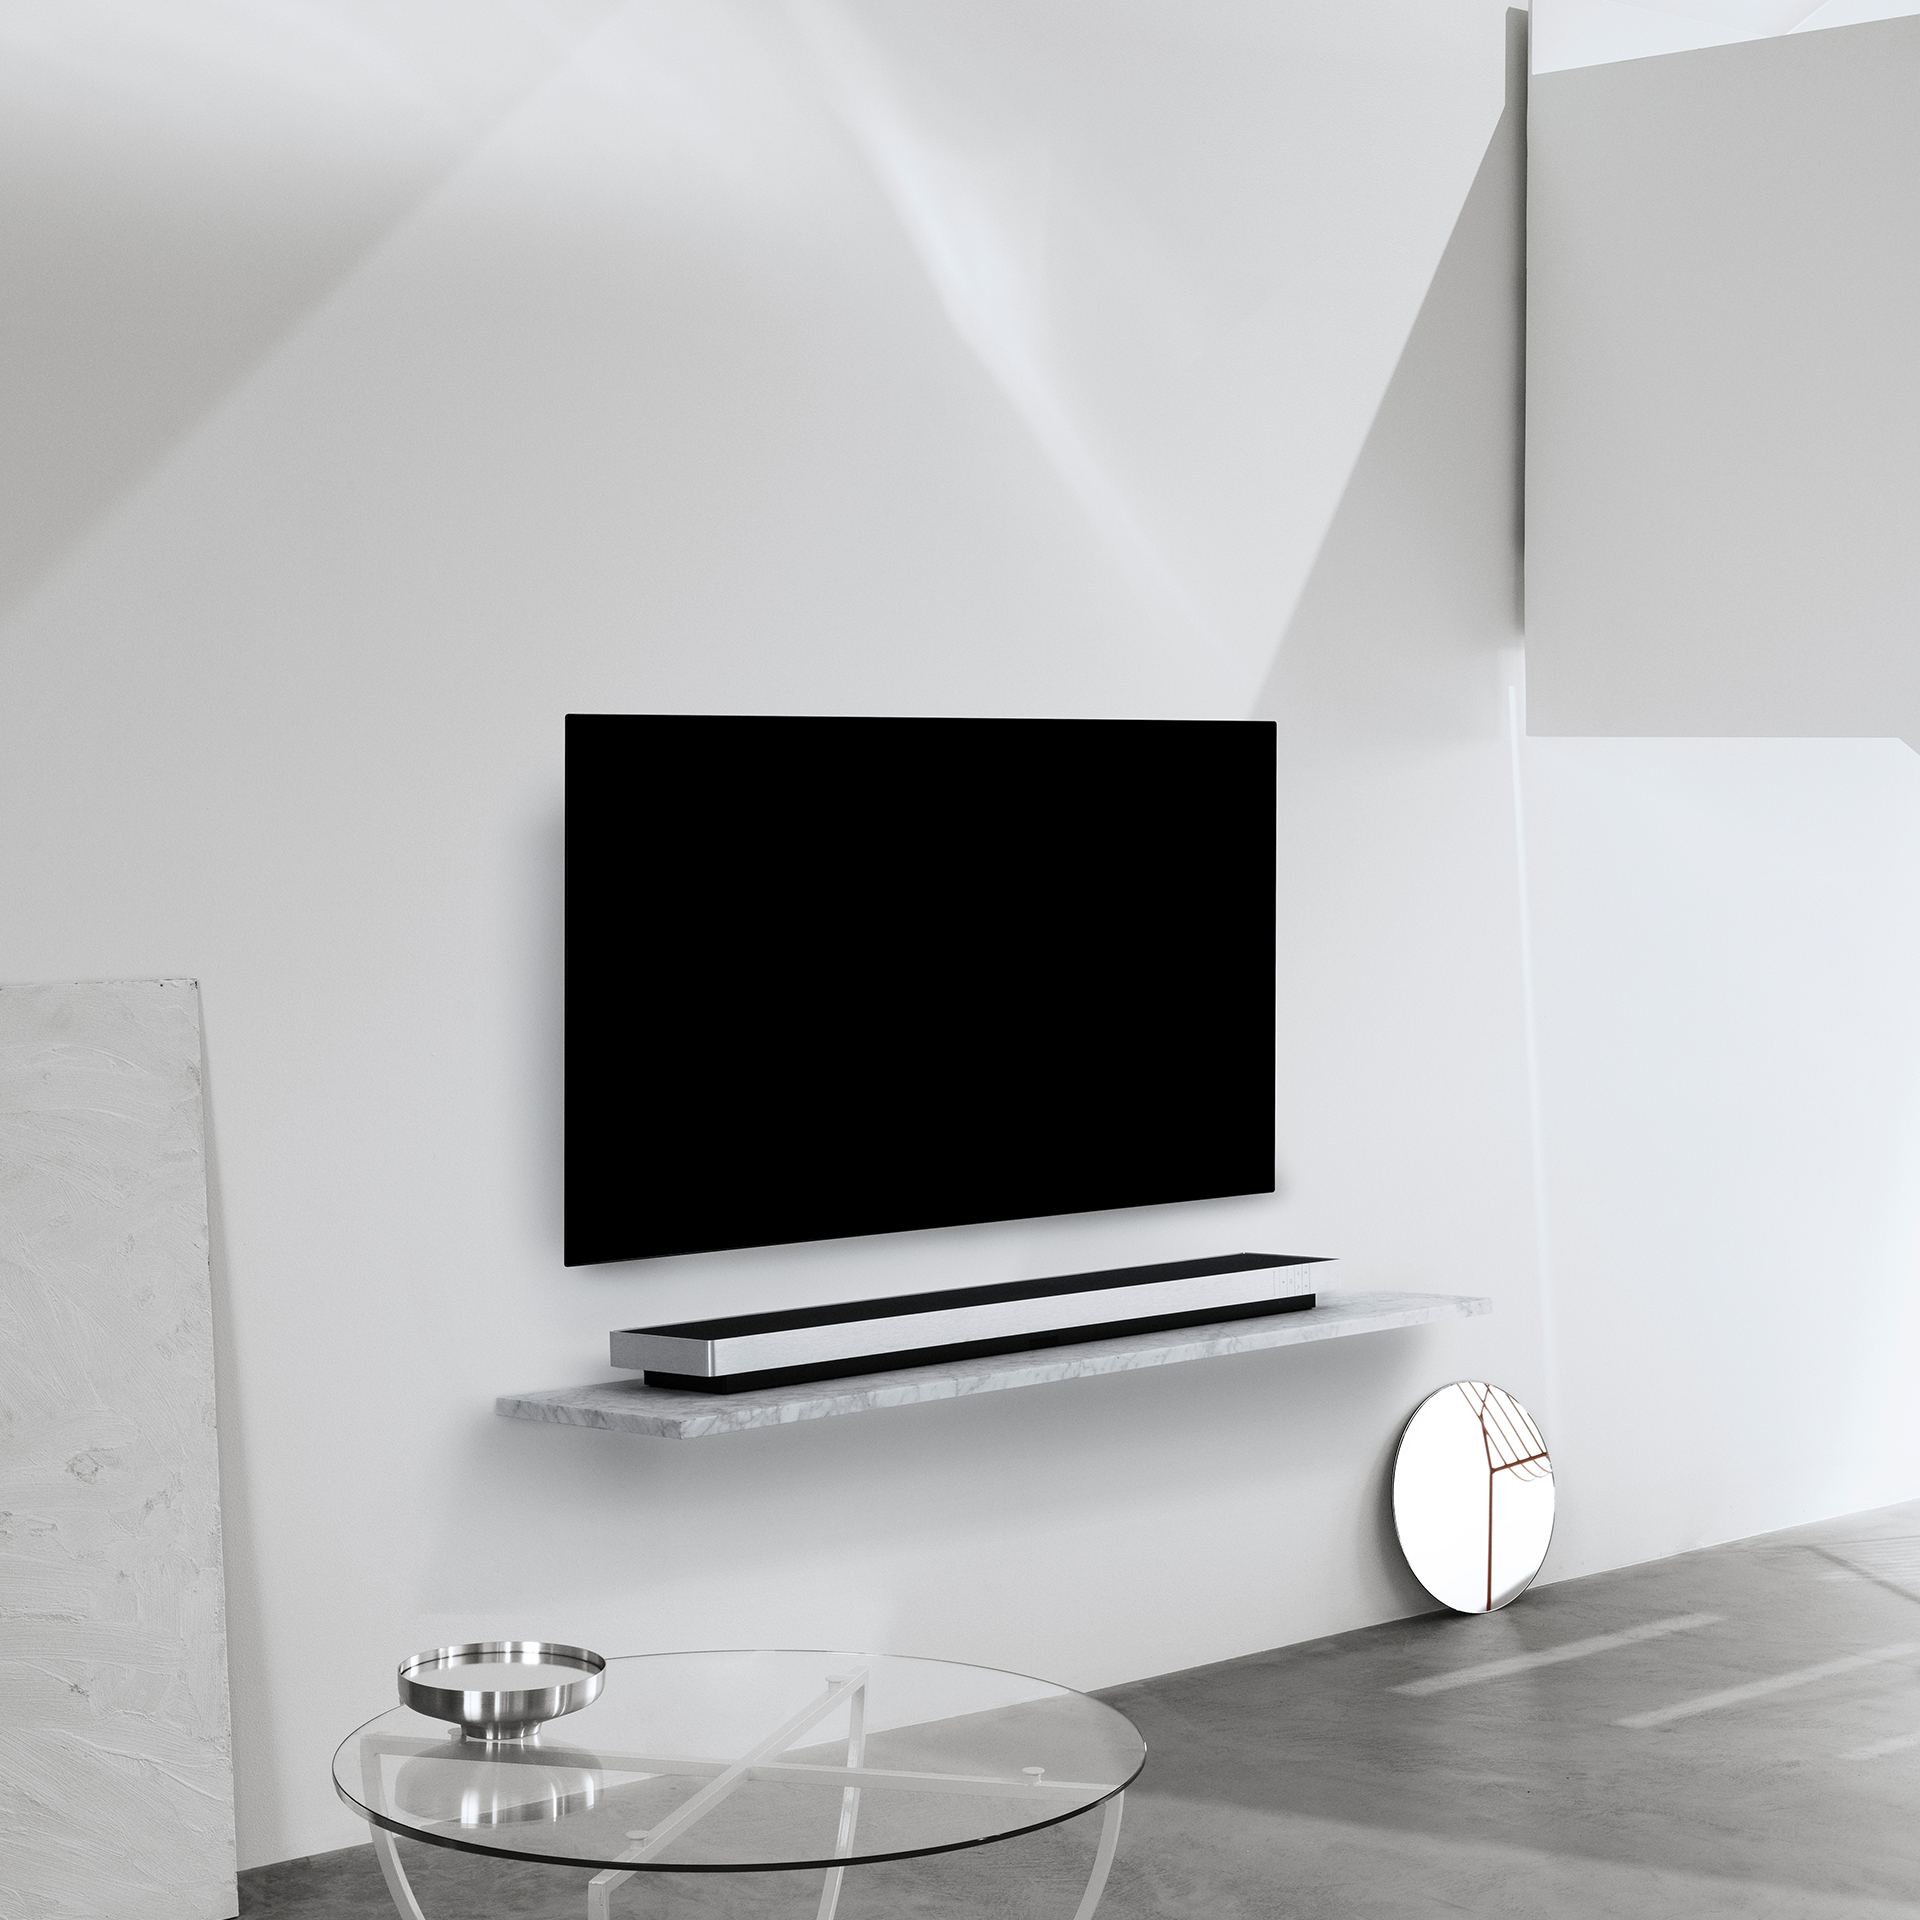 Beosound Stage Powerful Dolby Atmos - Bang & Olufsen